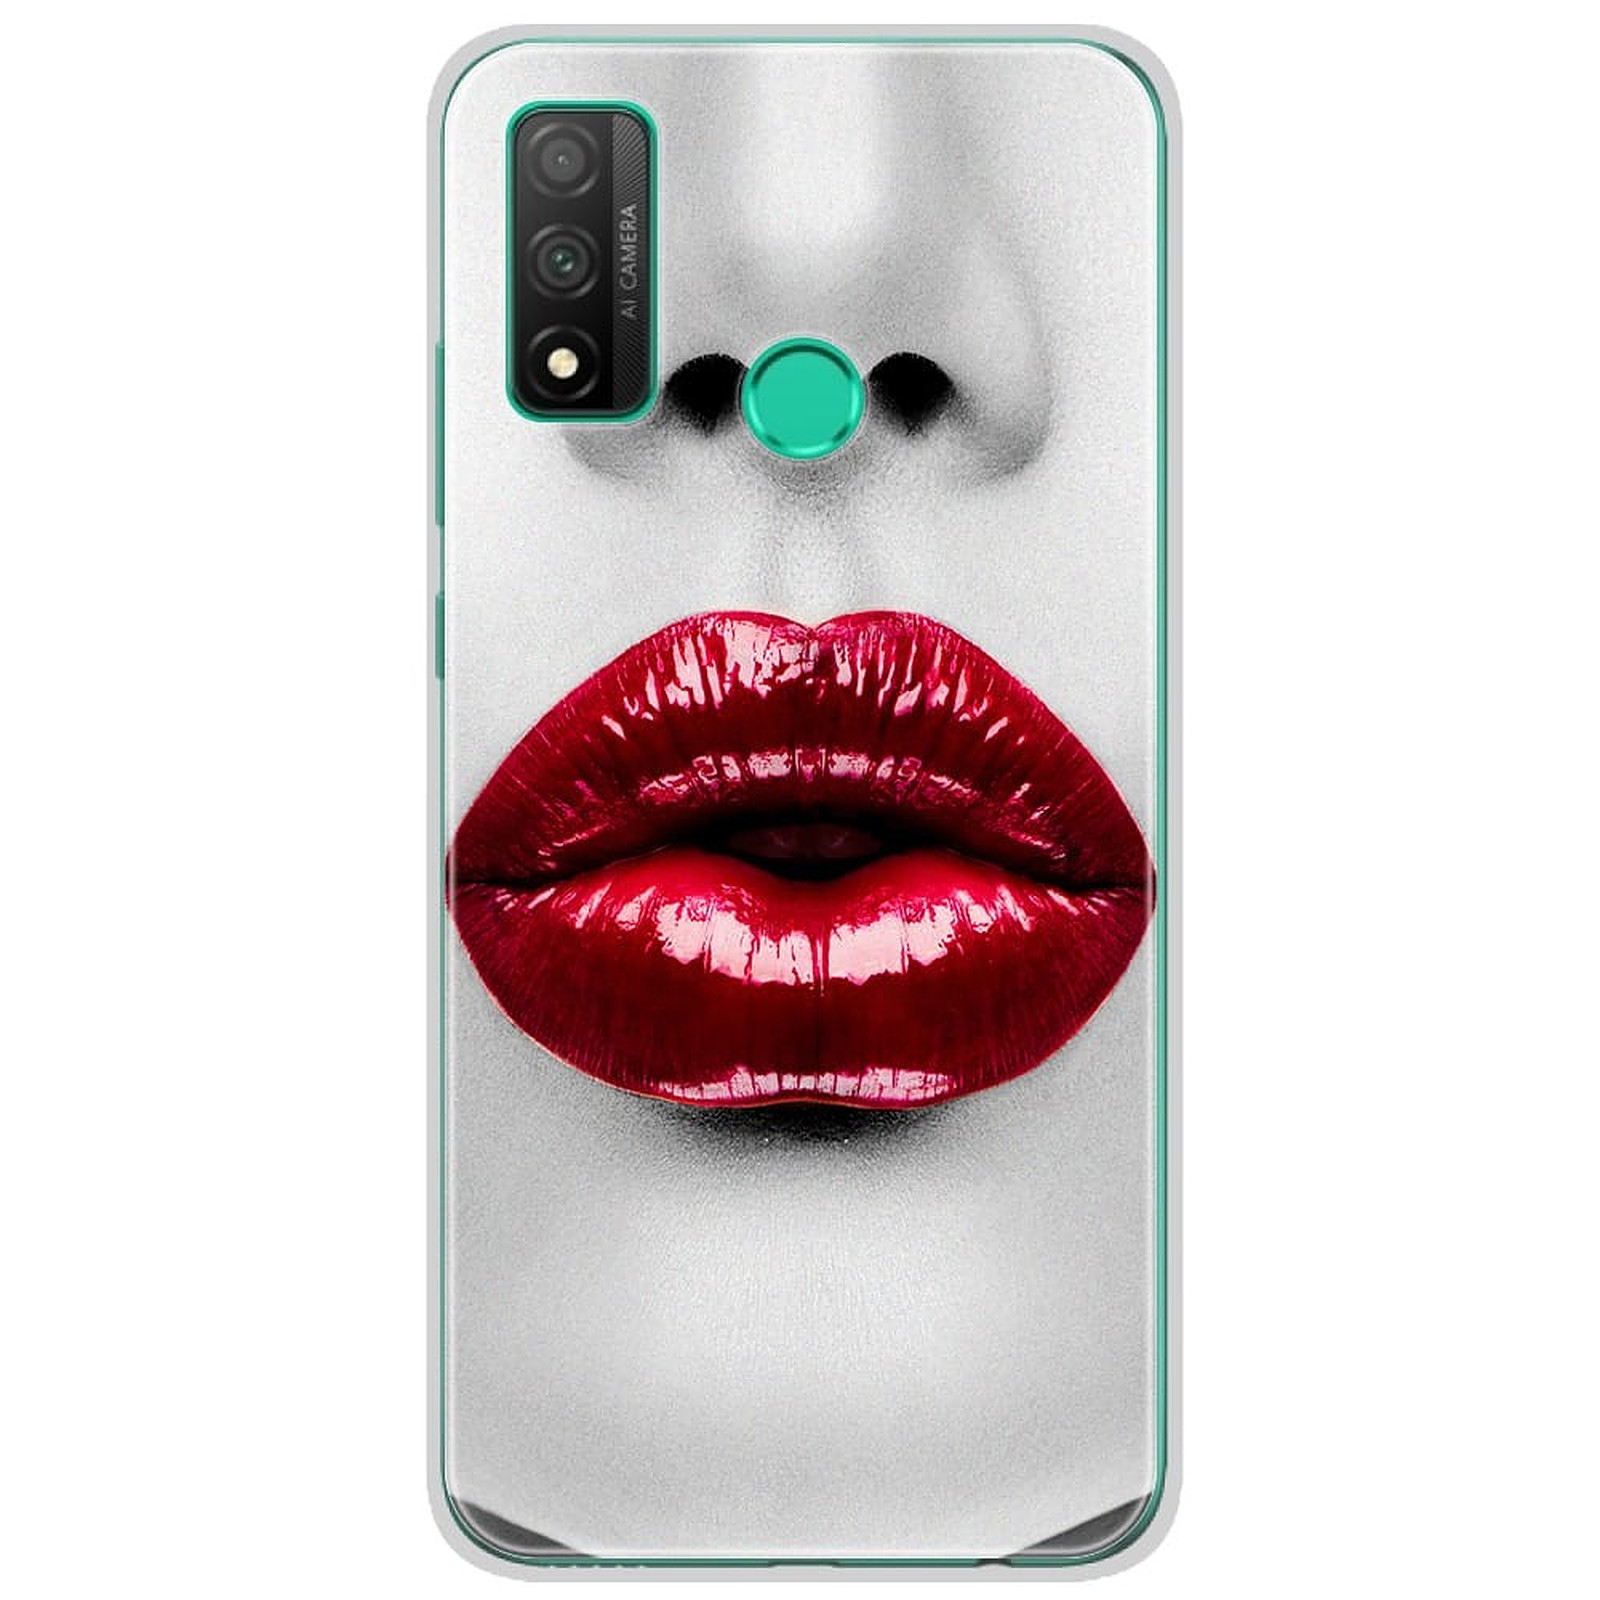 1001 Coques Coque silicone gel Huawei P Smart 2020 motif Lèvres Rouges - Coque telephone 1001Coques